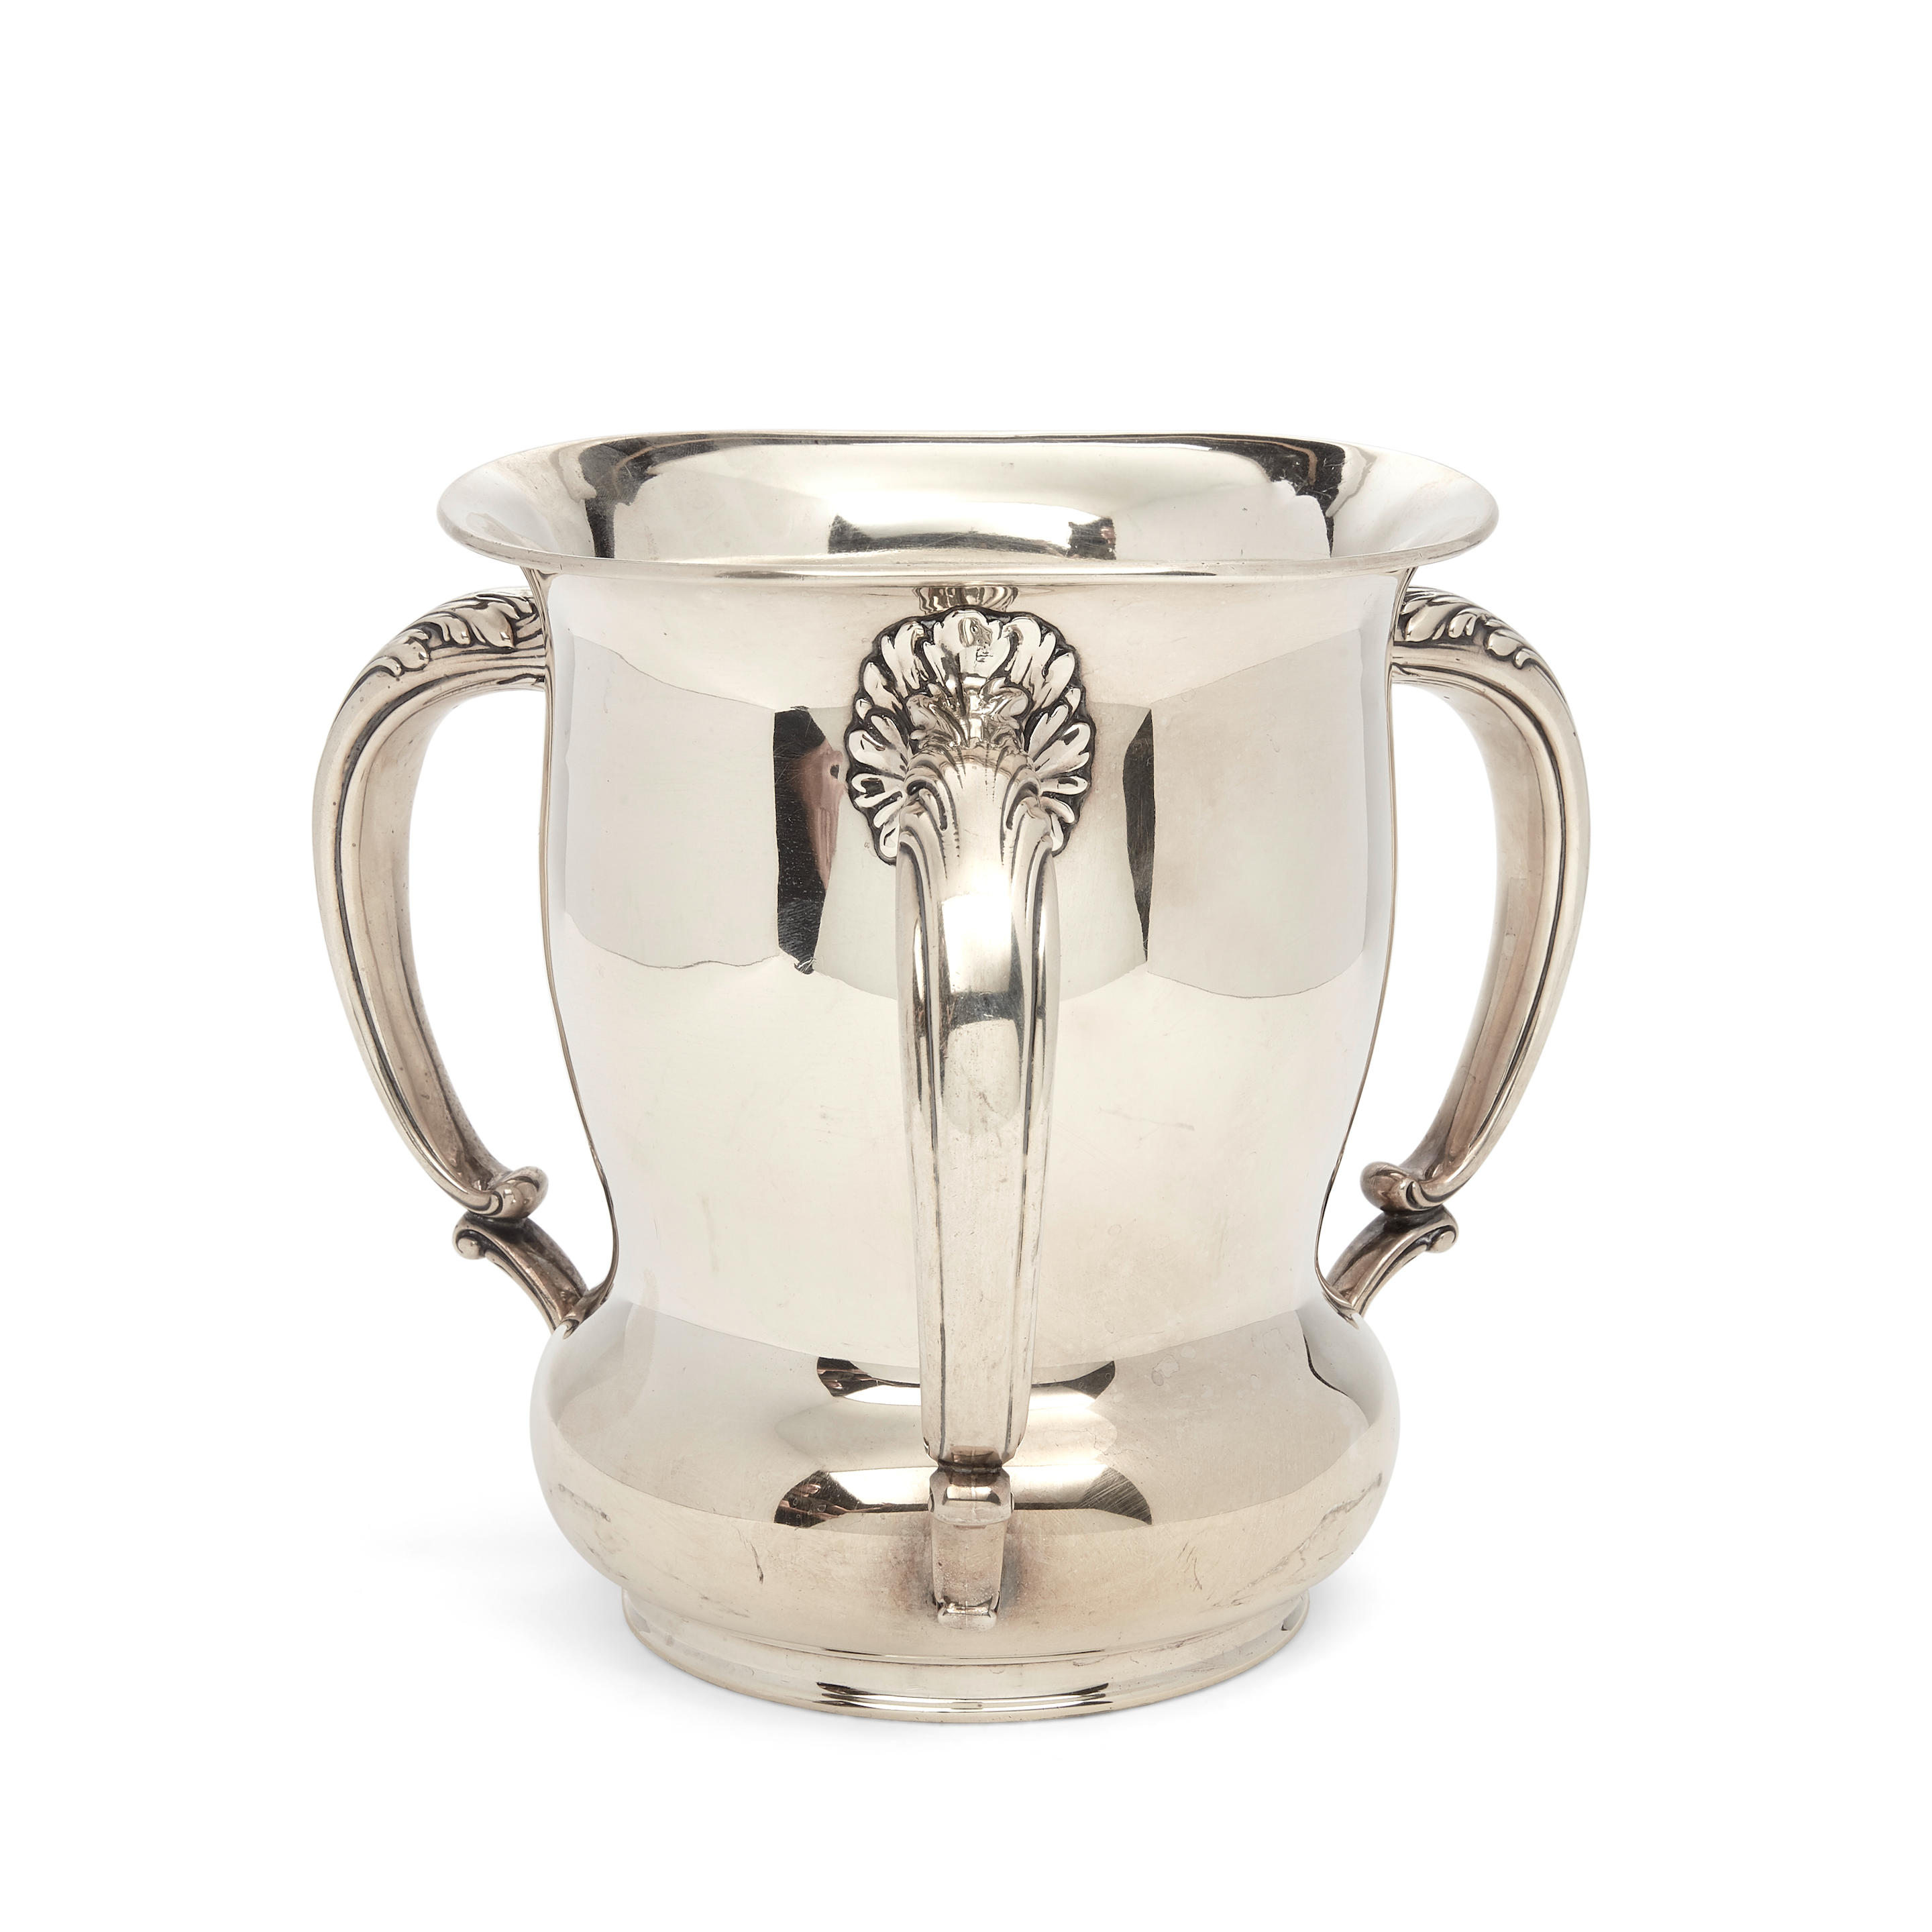 An American sterling silver three-handled loving cup